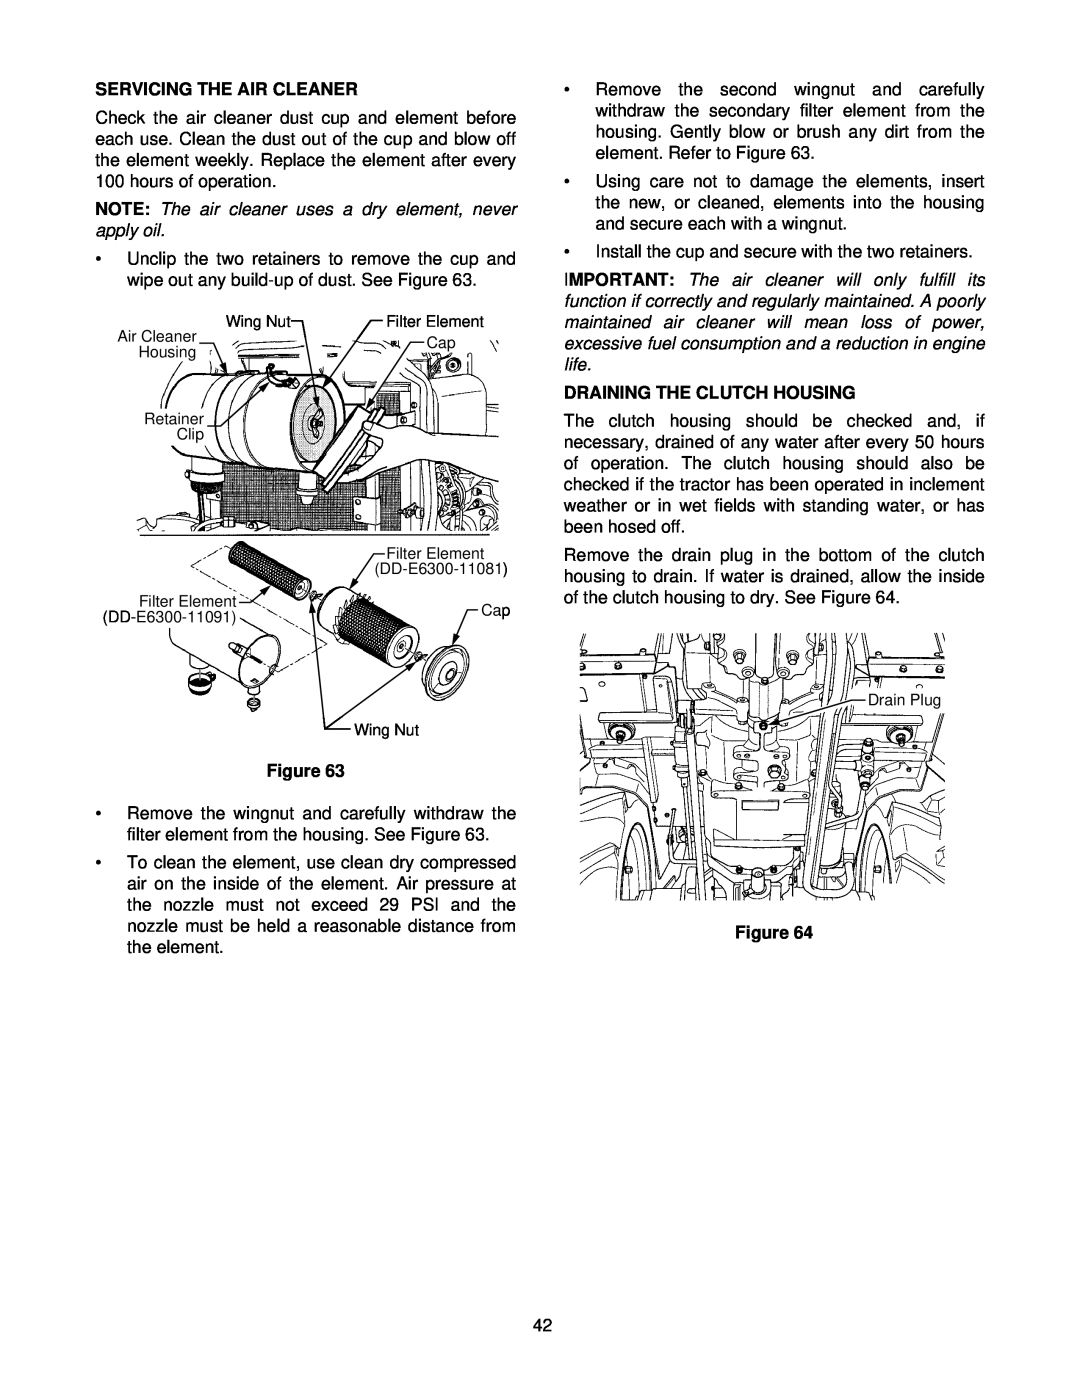 Cub Cadet 8354 manual Servicing The Air Cleaner, Draining The Clutch Housing, Figure 